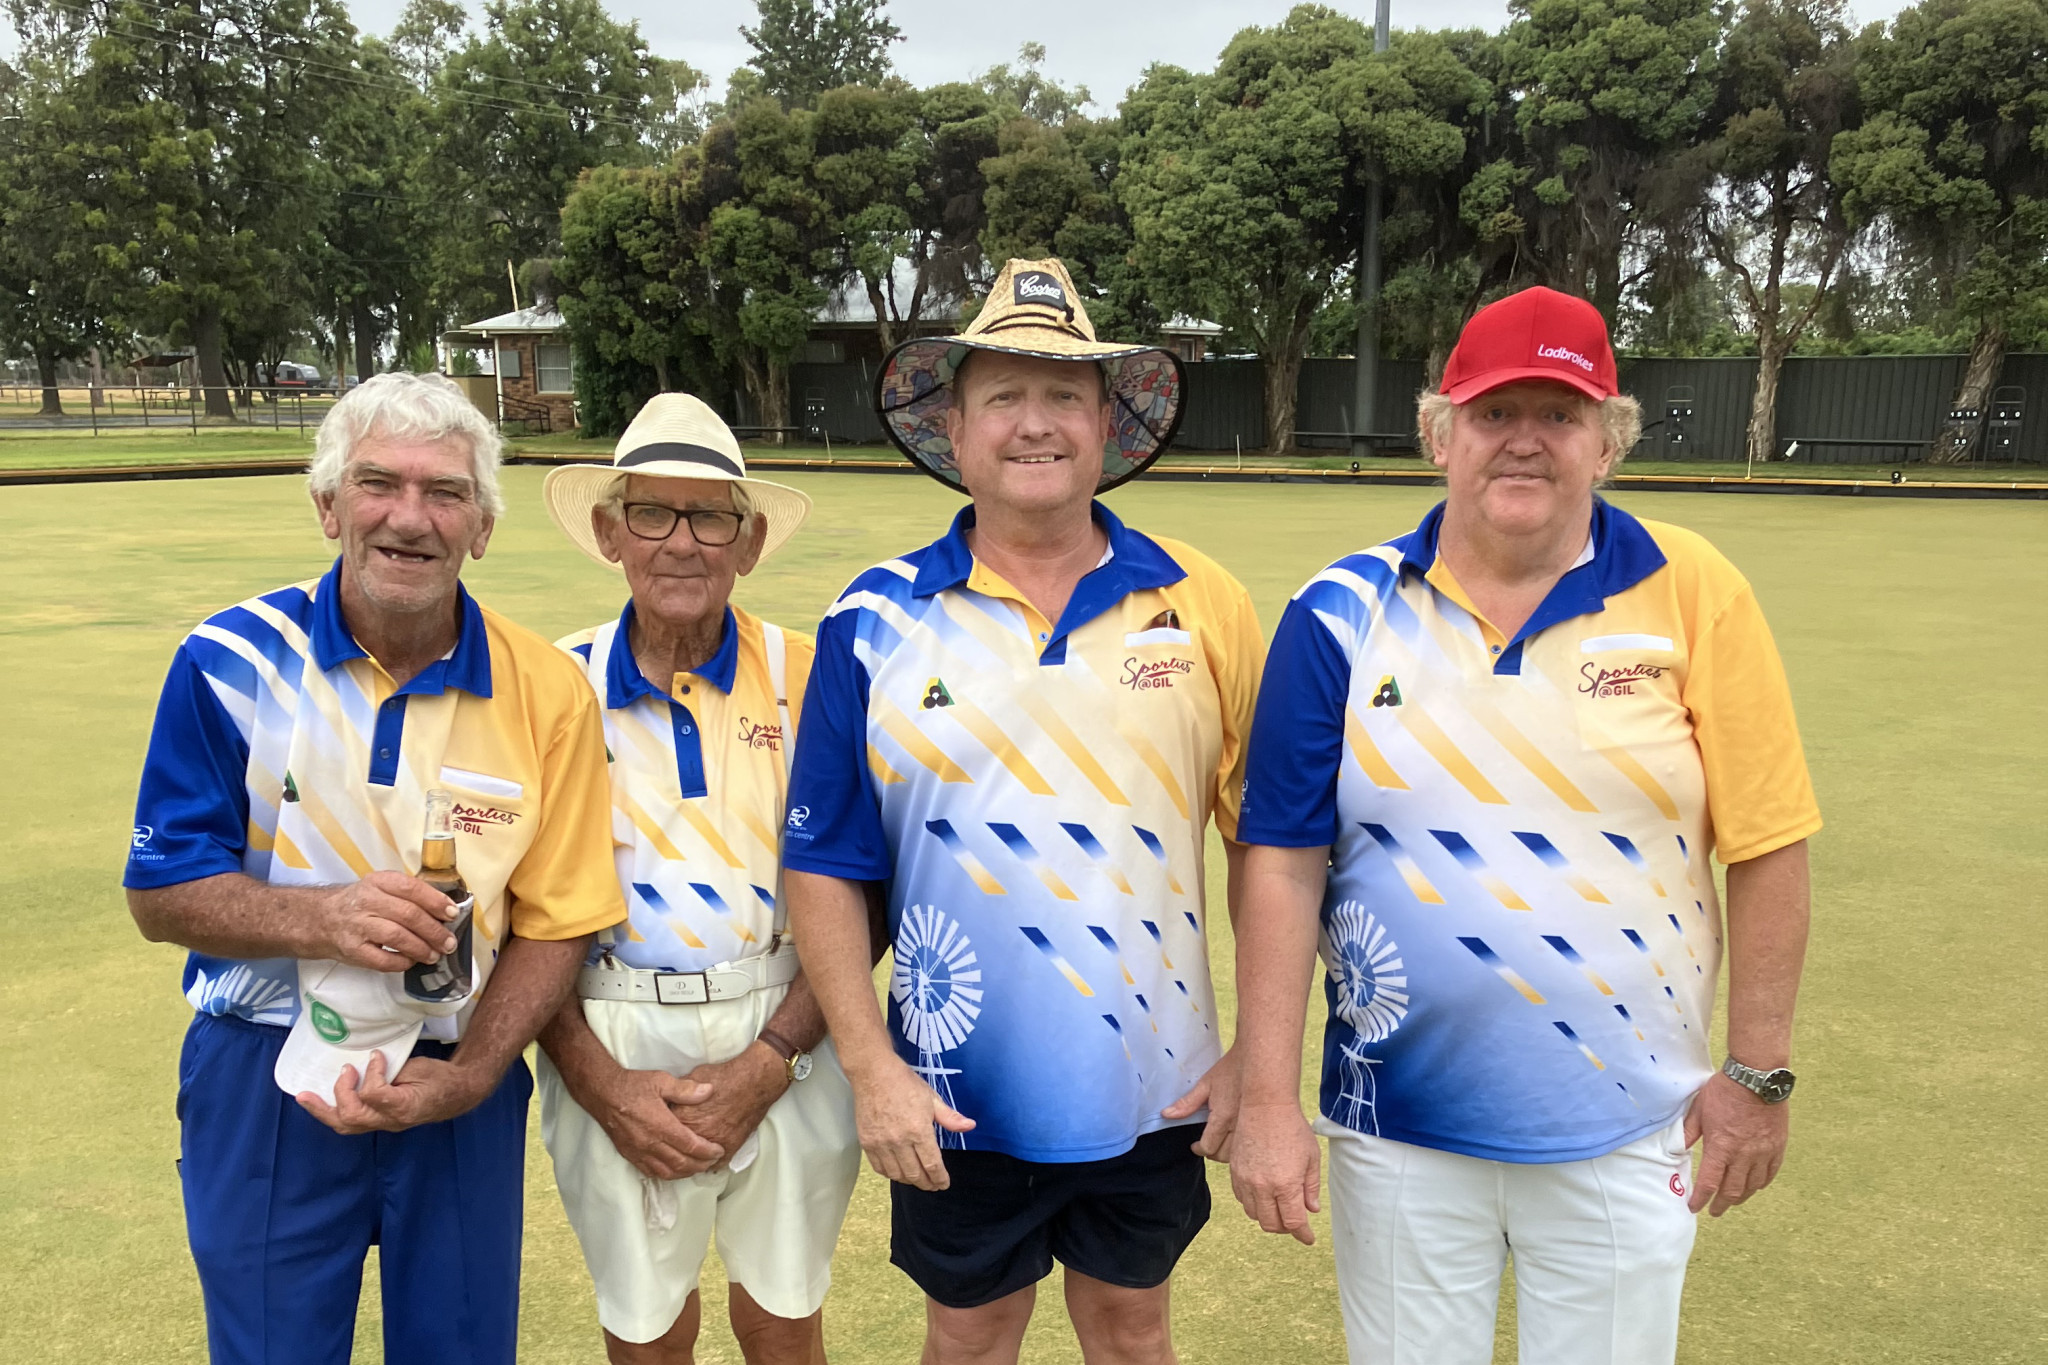 One happy team after the first round of the Fours Championships at Gilgandra Bowling Club on Saturday. Pictured are Rambo Young, Bruce Parker, Gavin Glover, and Tom Ledger. Photo supplied.